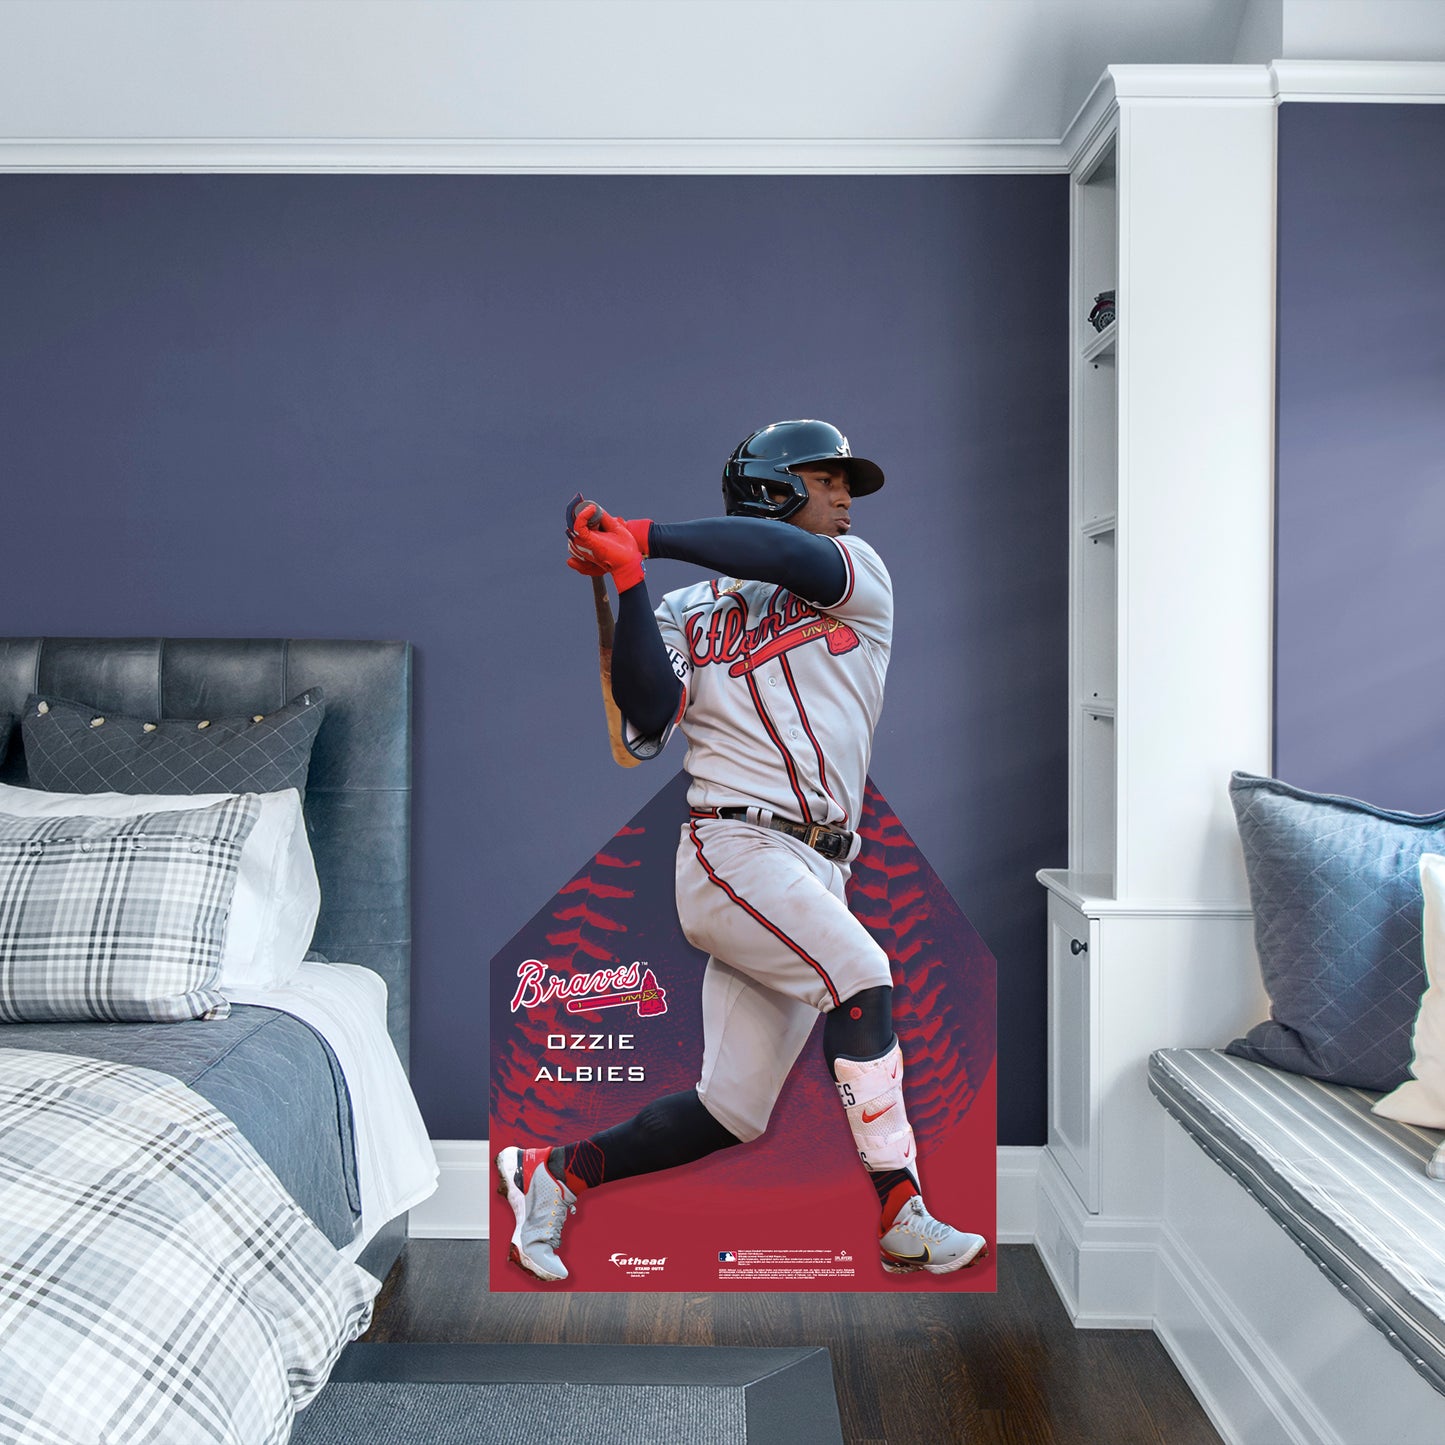 Atlanta Braves: Ozzie Albies 2022  Life-Size   Foam Core Cutout  - Officially Licensed MLB    Stand Out